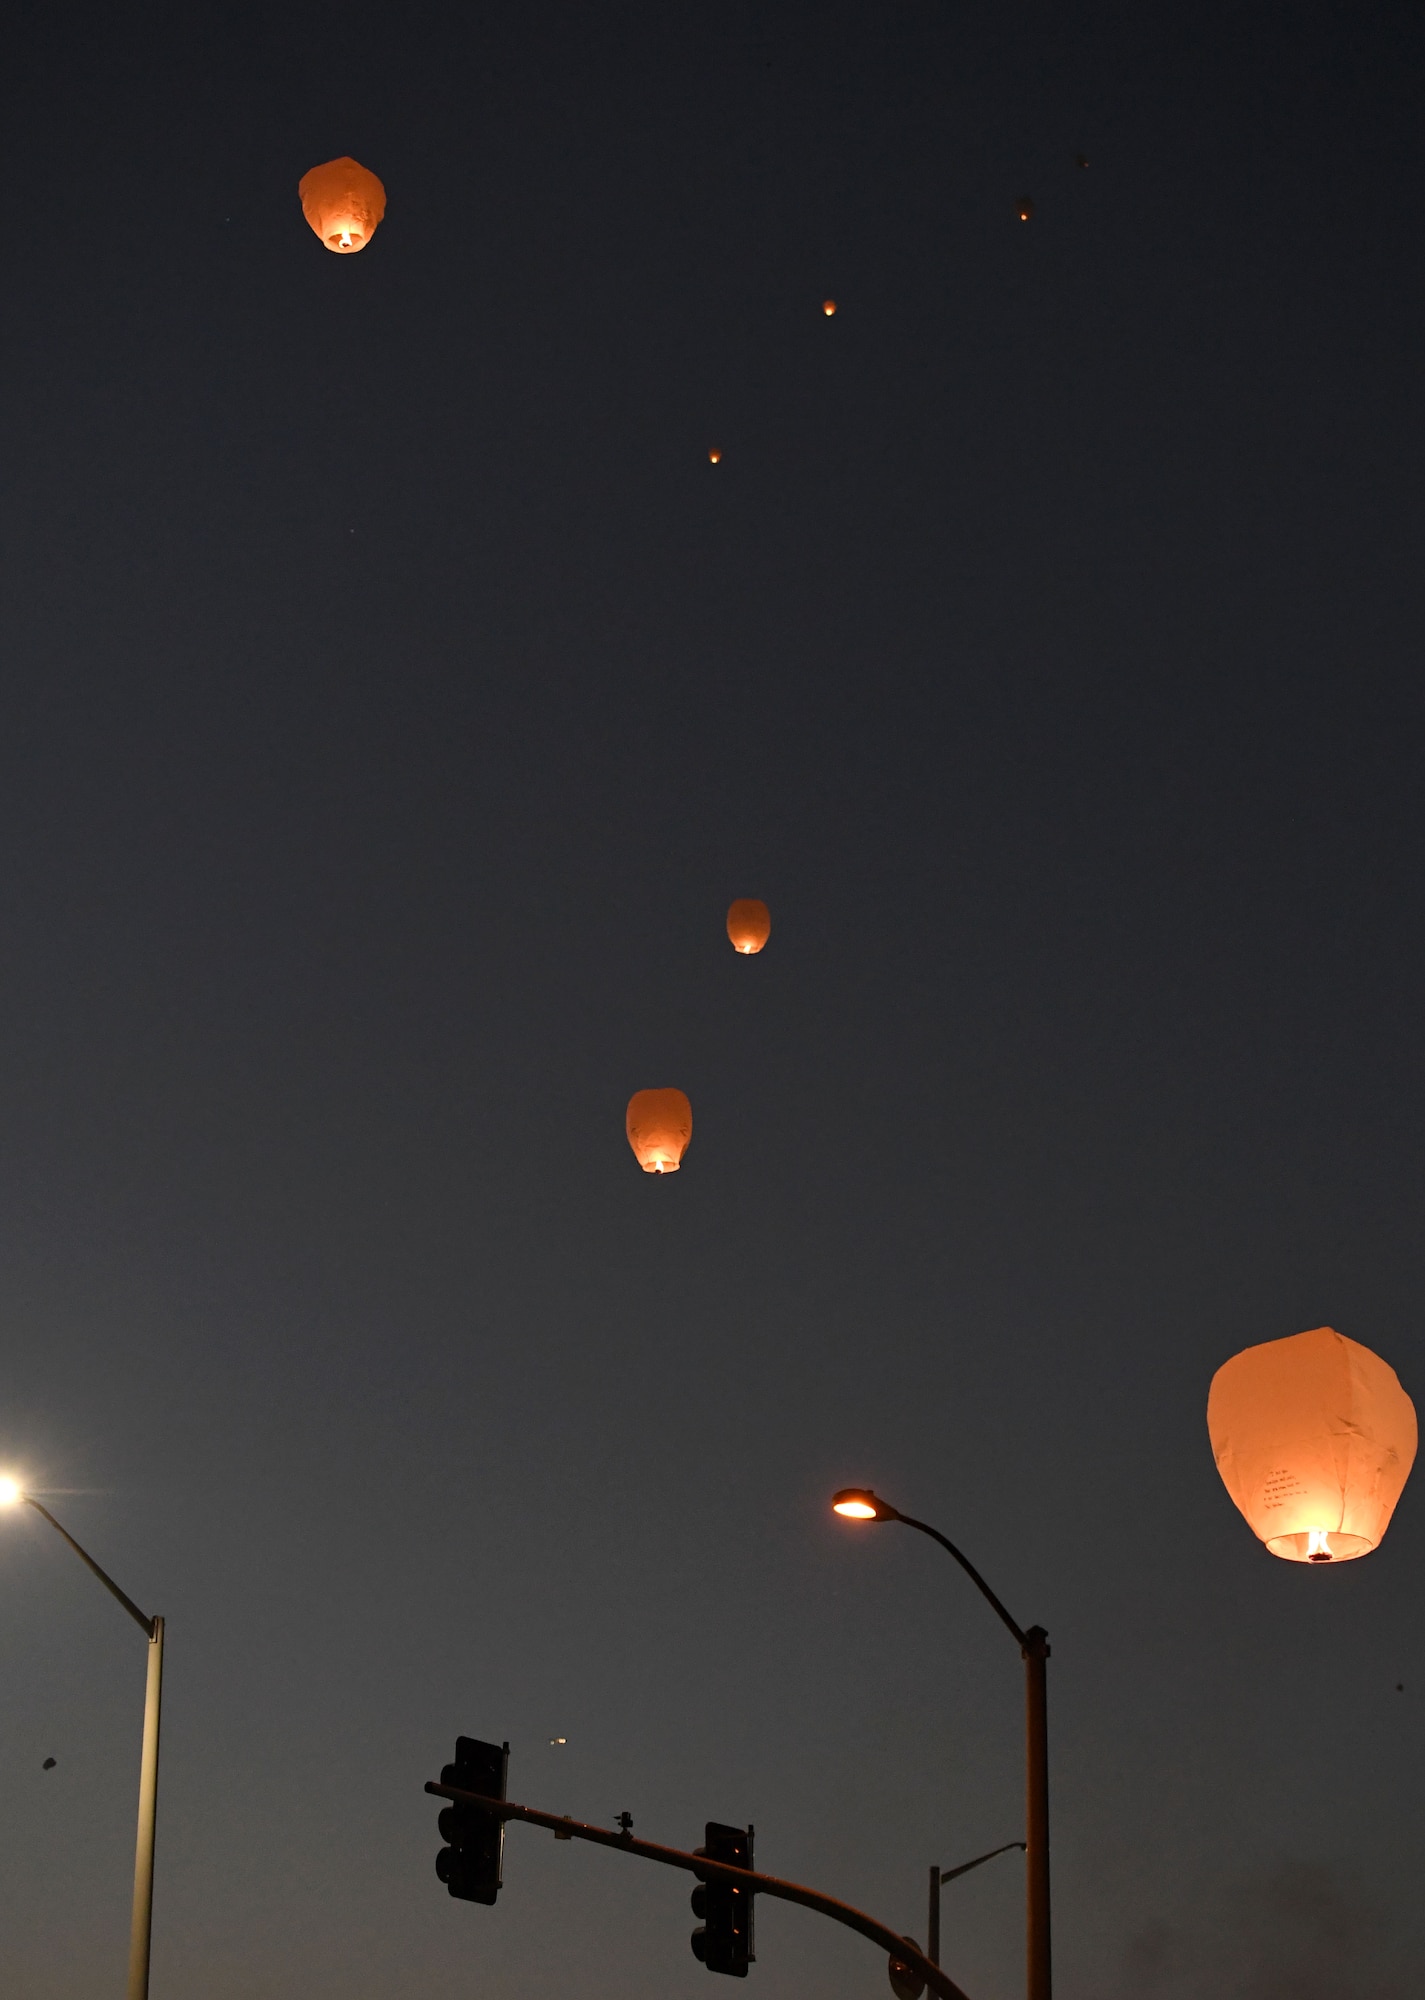 Lanterns light the sky during the Gold Star Families Sky Lantern Release on the Biloxi Beach, Mississippi, Sept. 23, 2022. The event, hosted by Keesler Air Force Base, included eco-friendly sky lanterns released in honor of fallen heroes. (U.S. Air Force photo by Kemberly Groue)